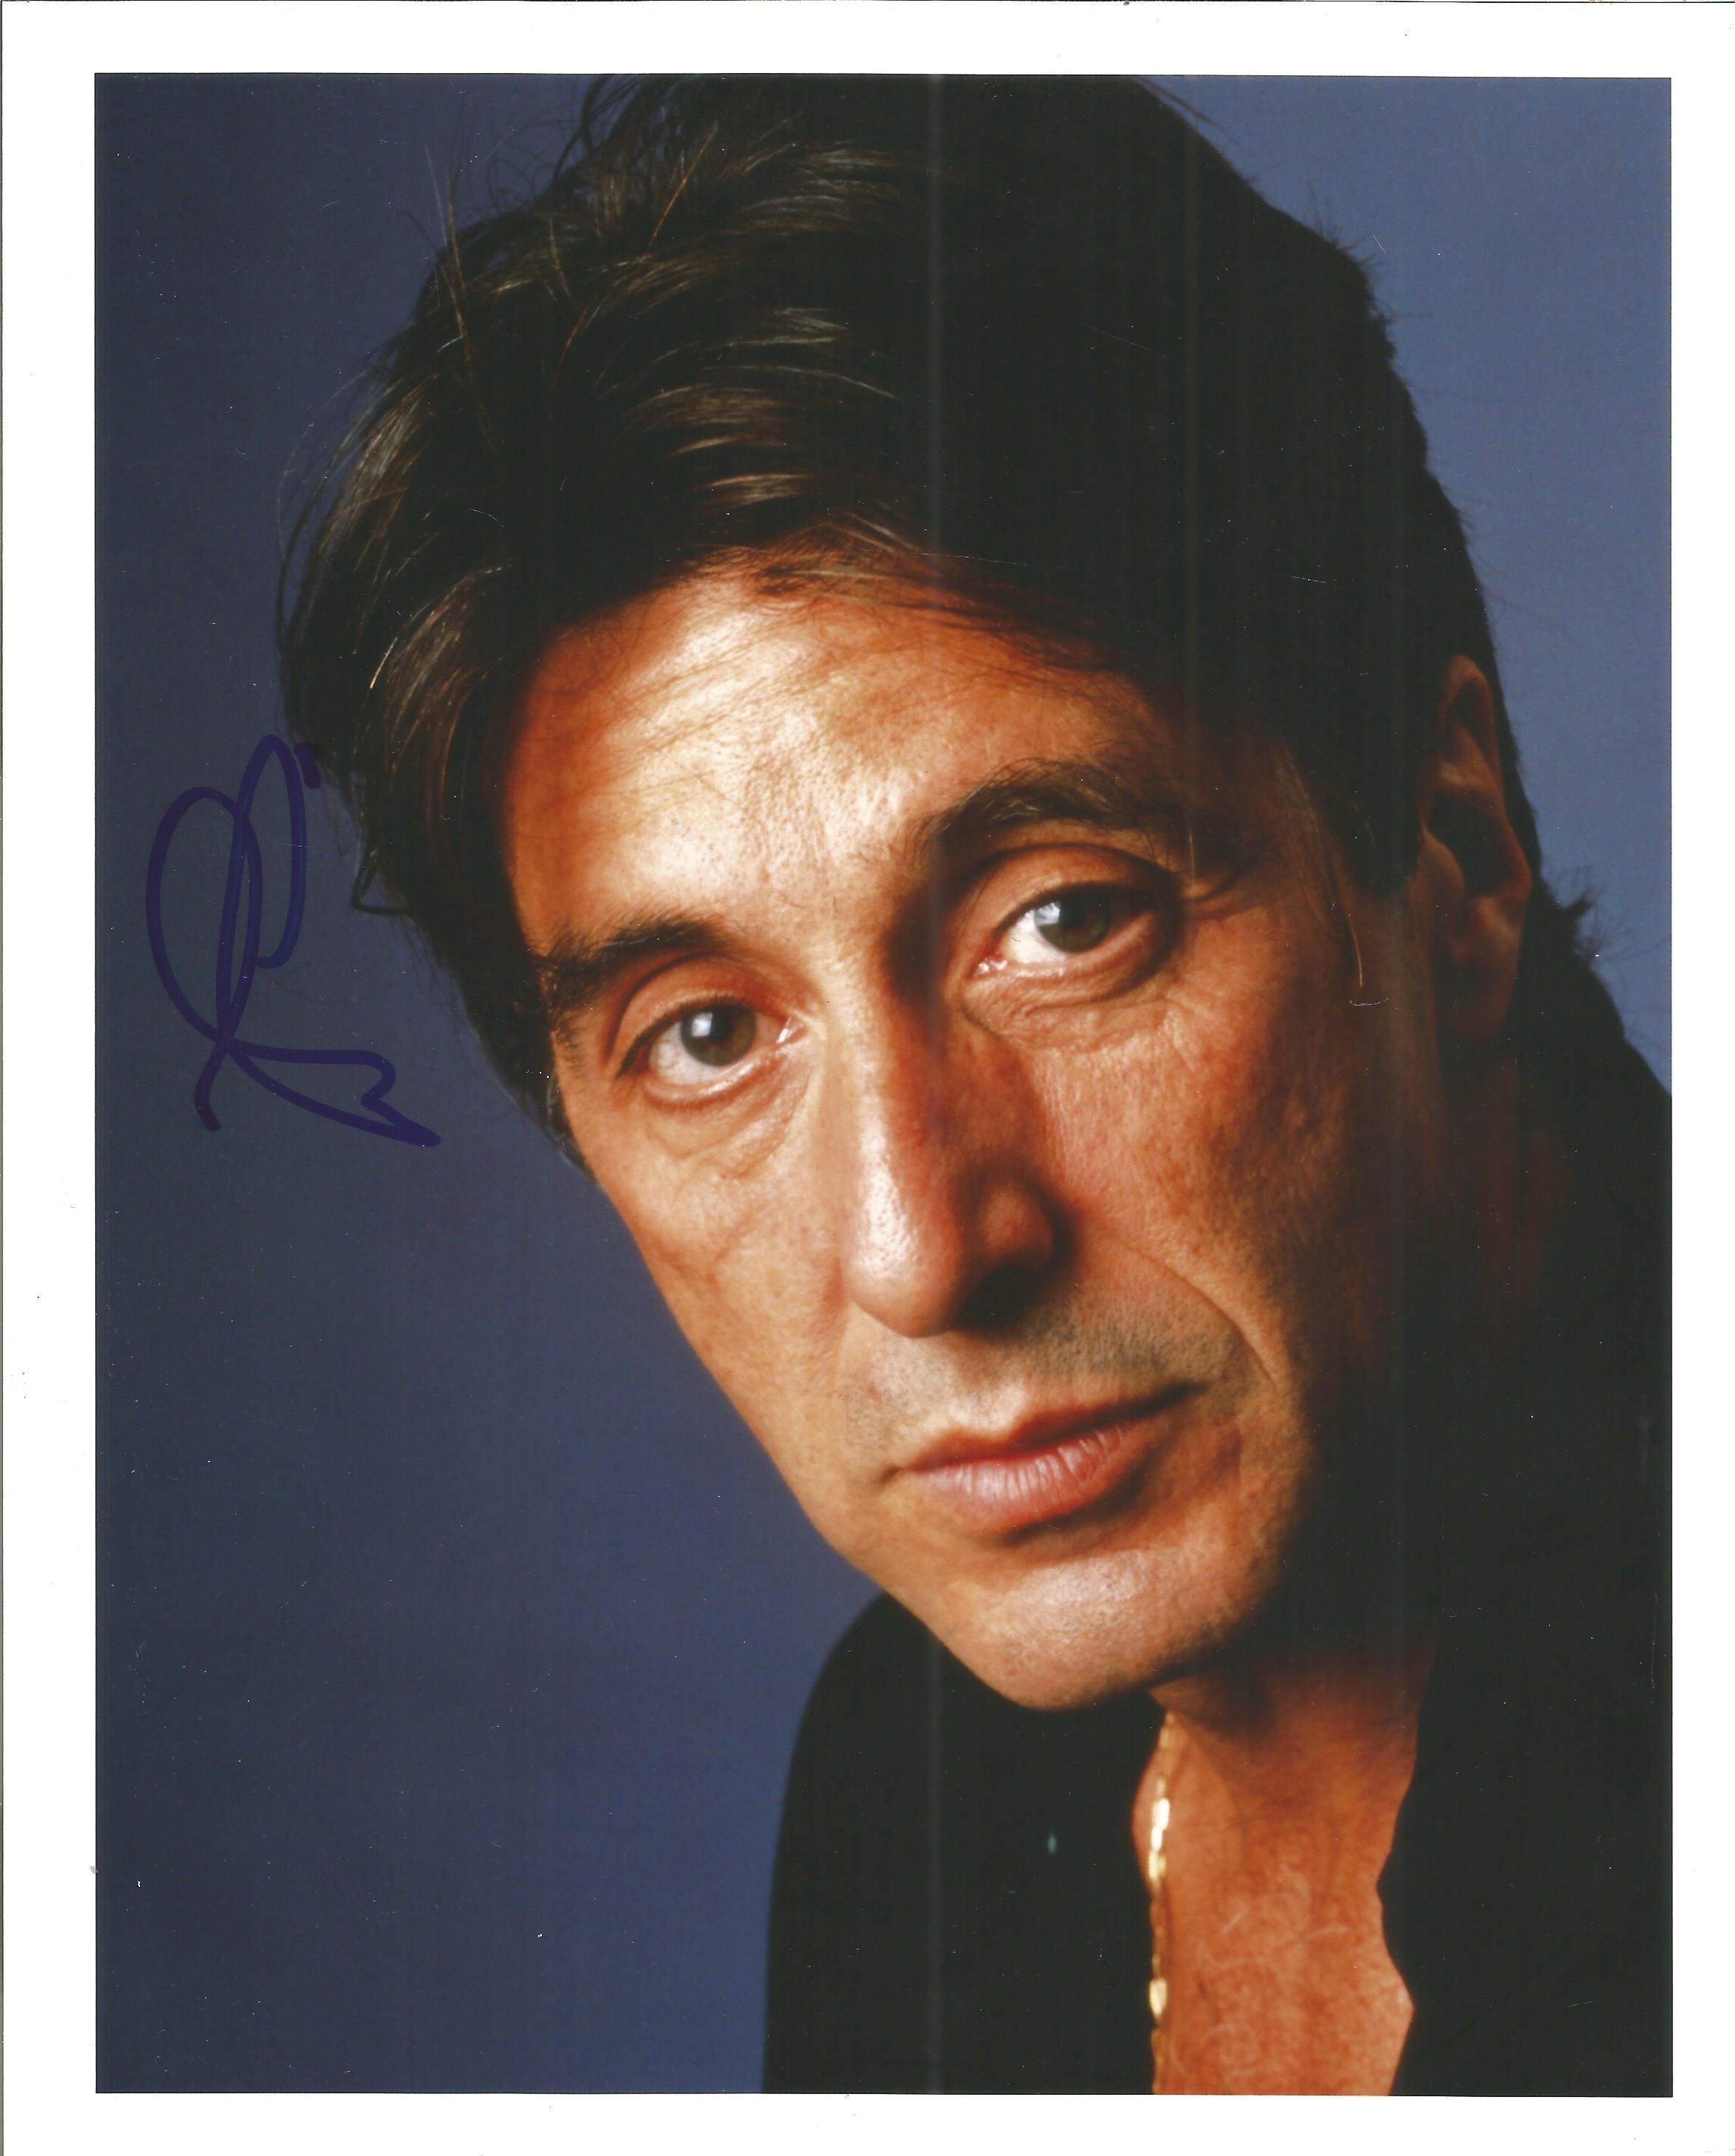 Al Pacino Signed 10x8 Colour Photo. Good condition. All autographs come with a Certificate of